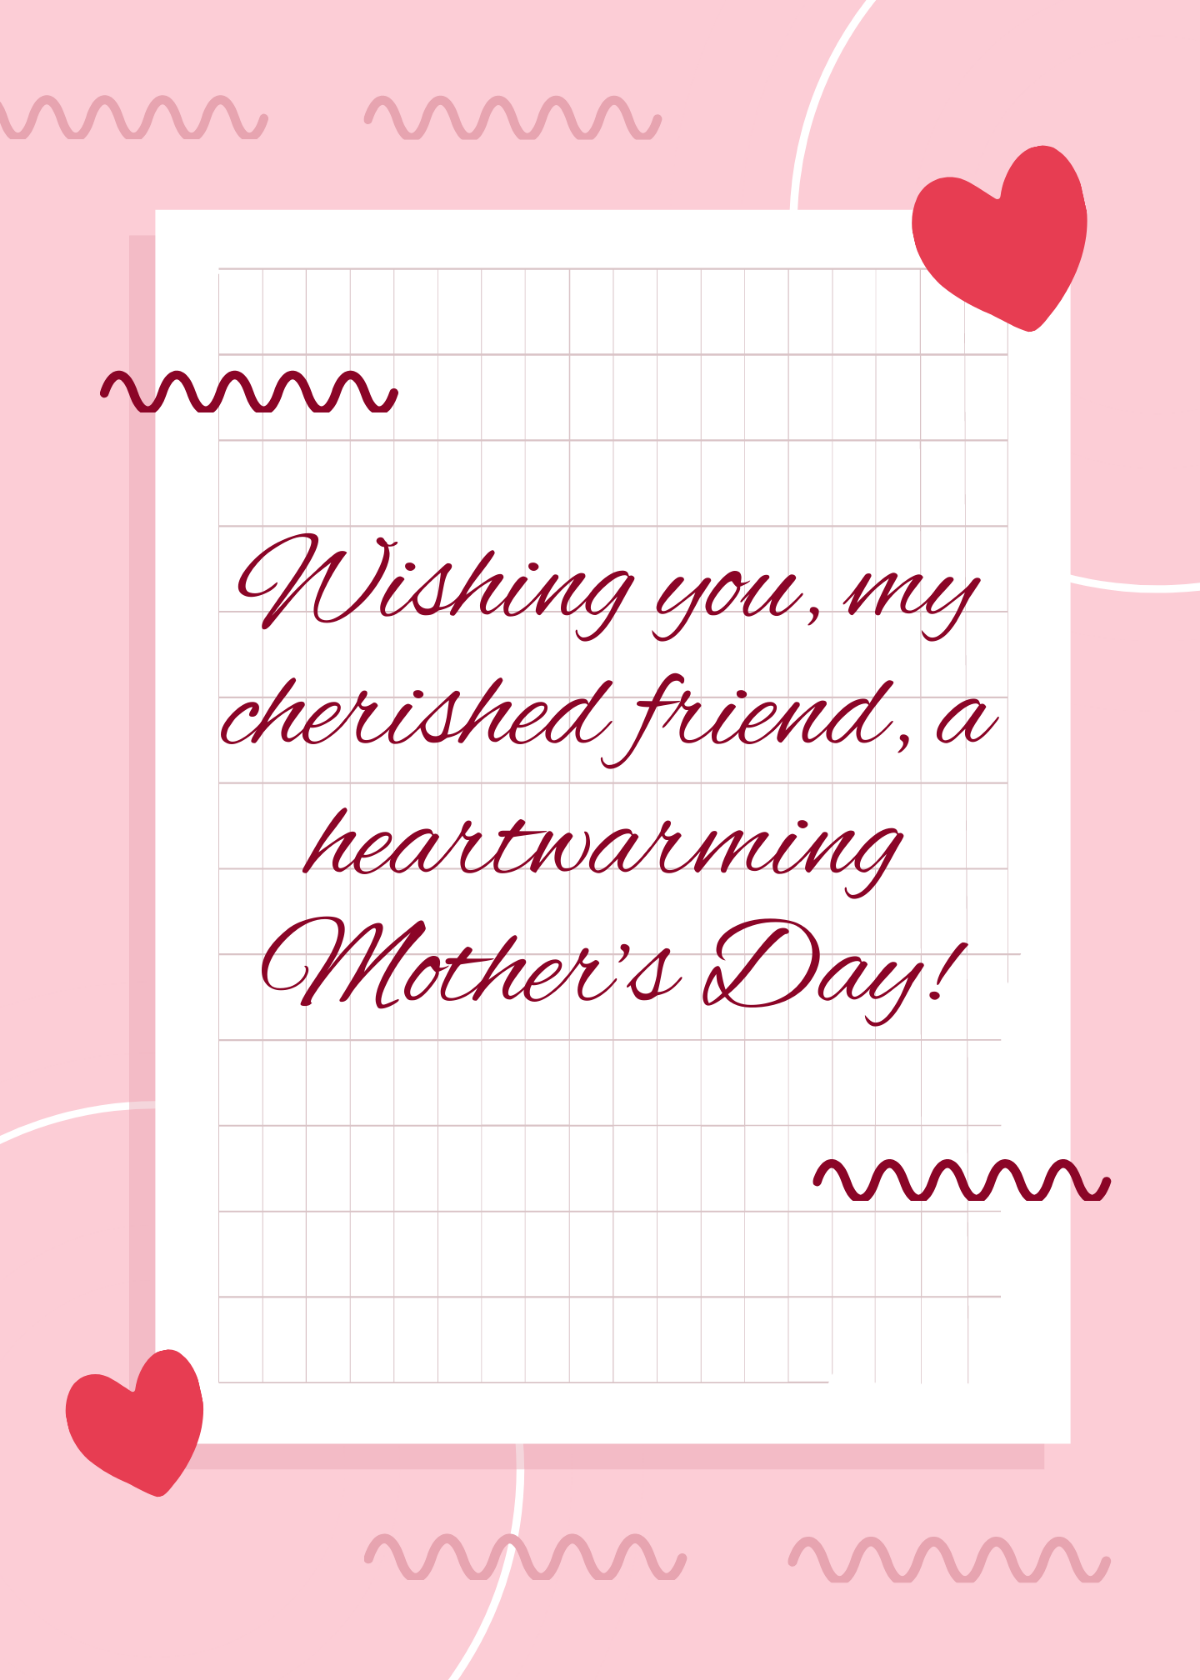 Mother's Day Wishes For Friend Template